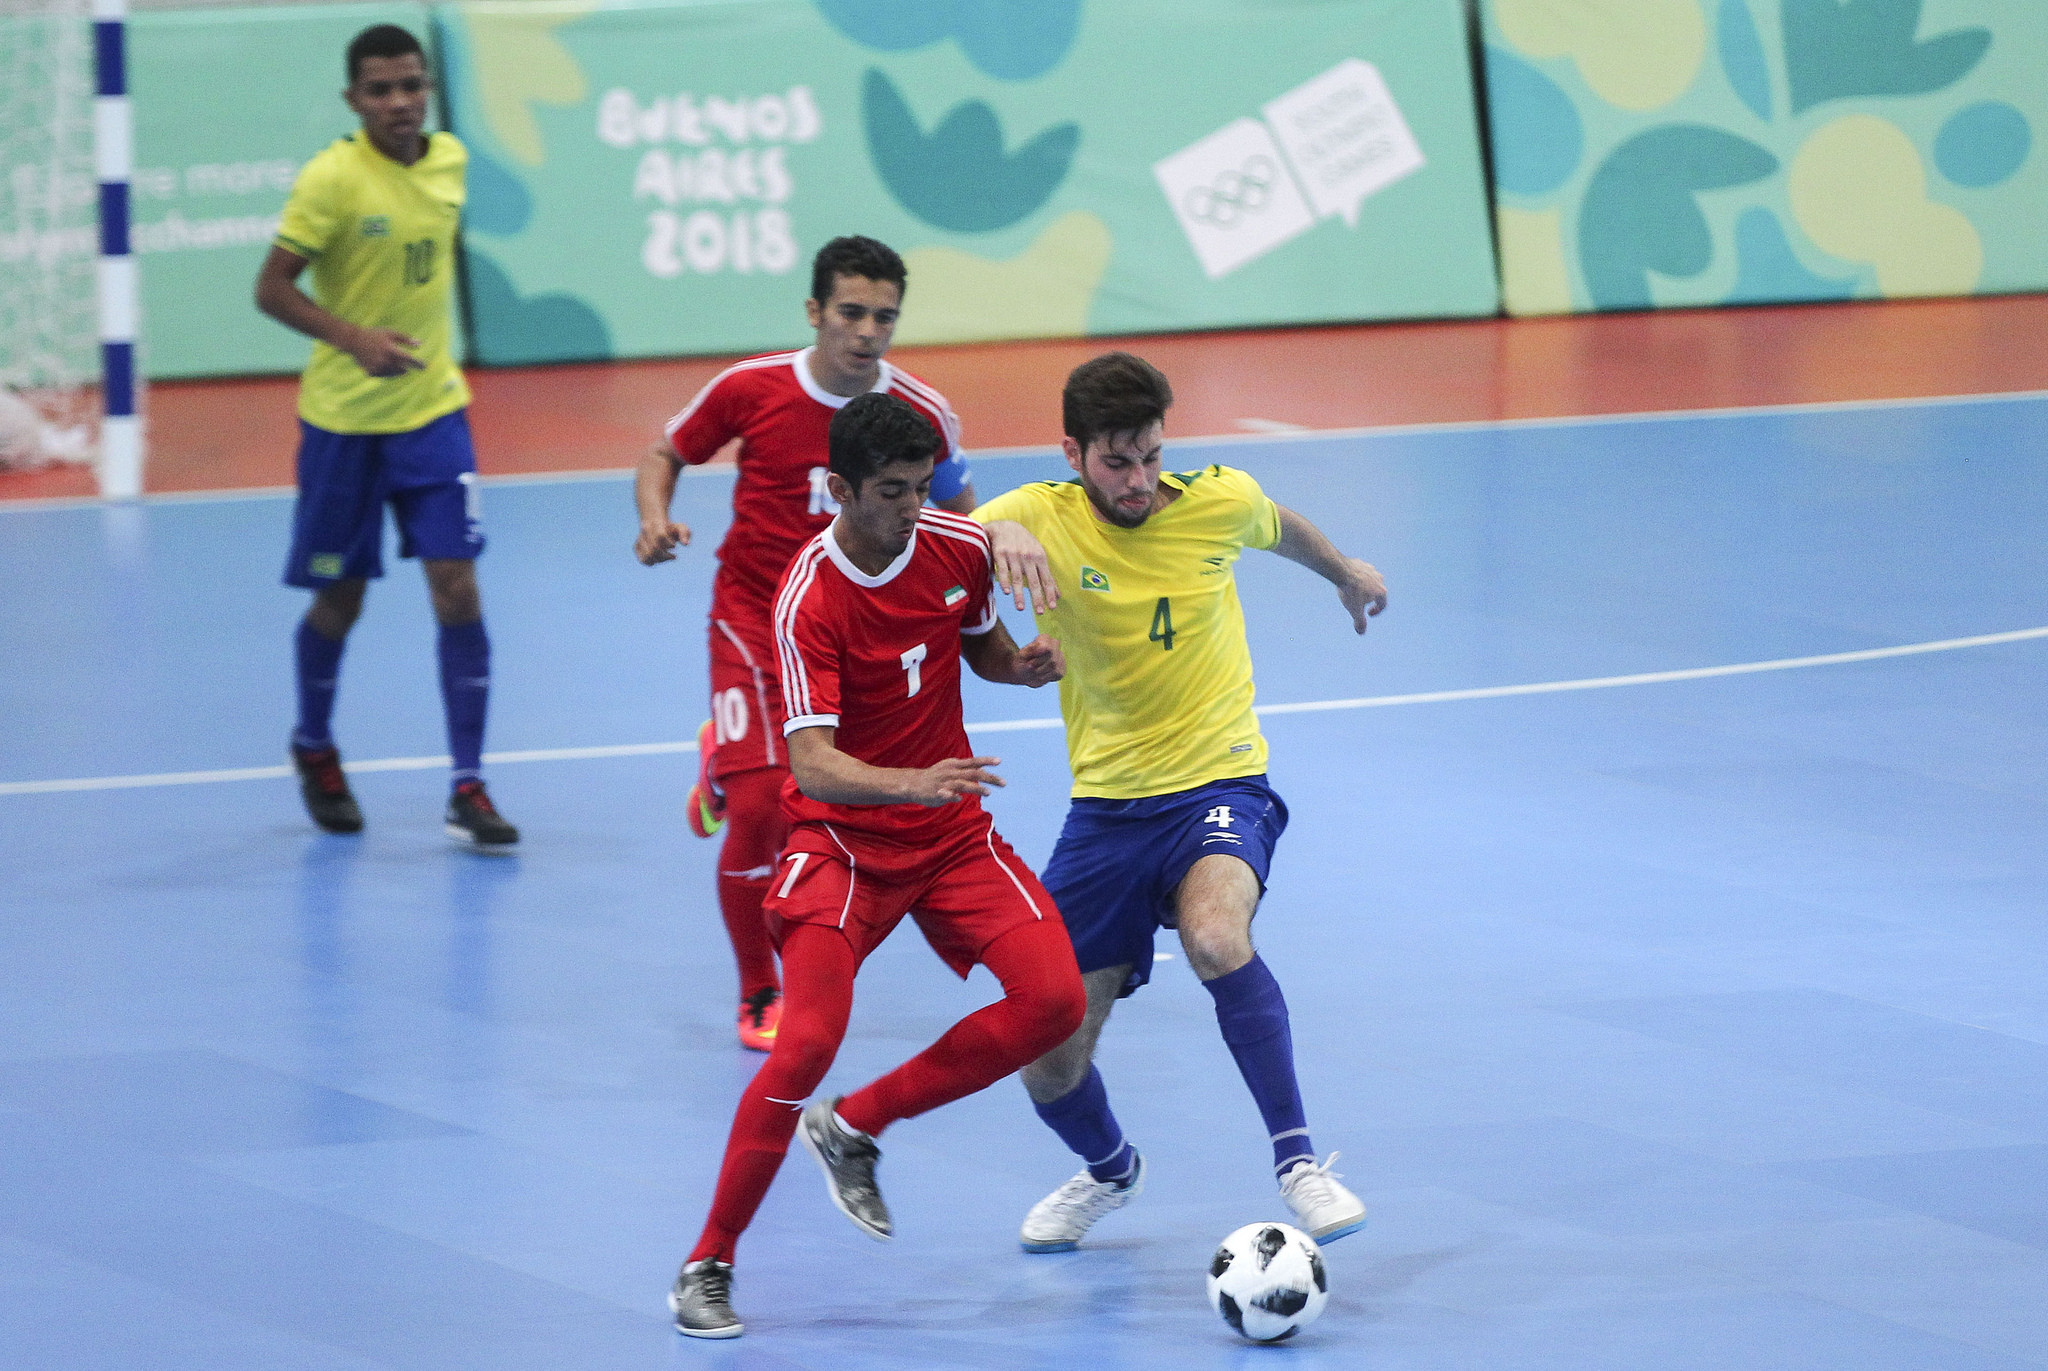 Futsal action continued on day four at the 2018 Youth Olympics ©Buenos Aires 2018